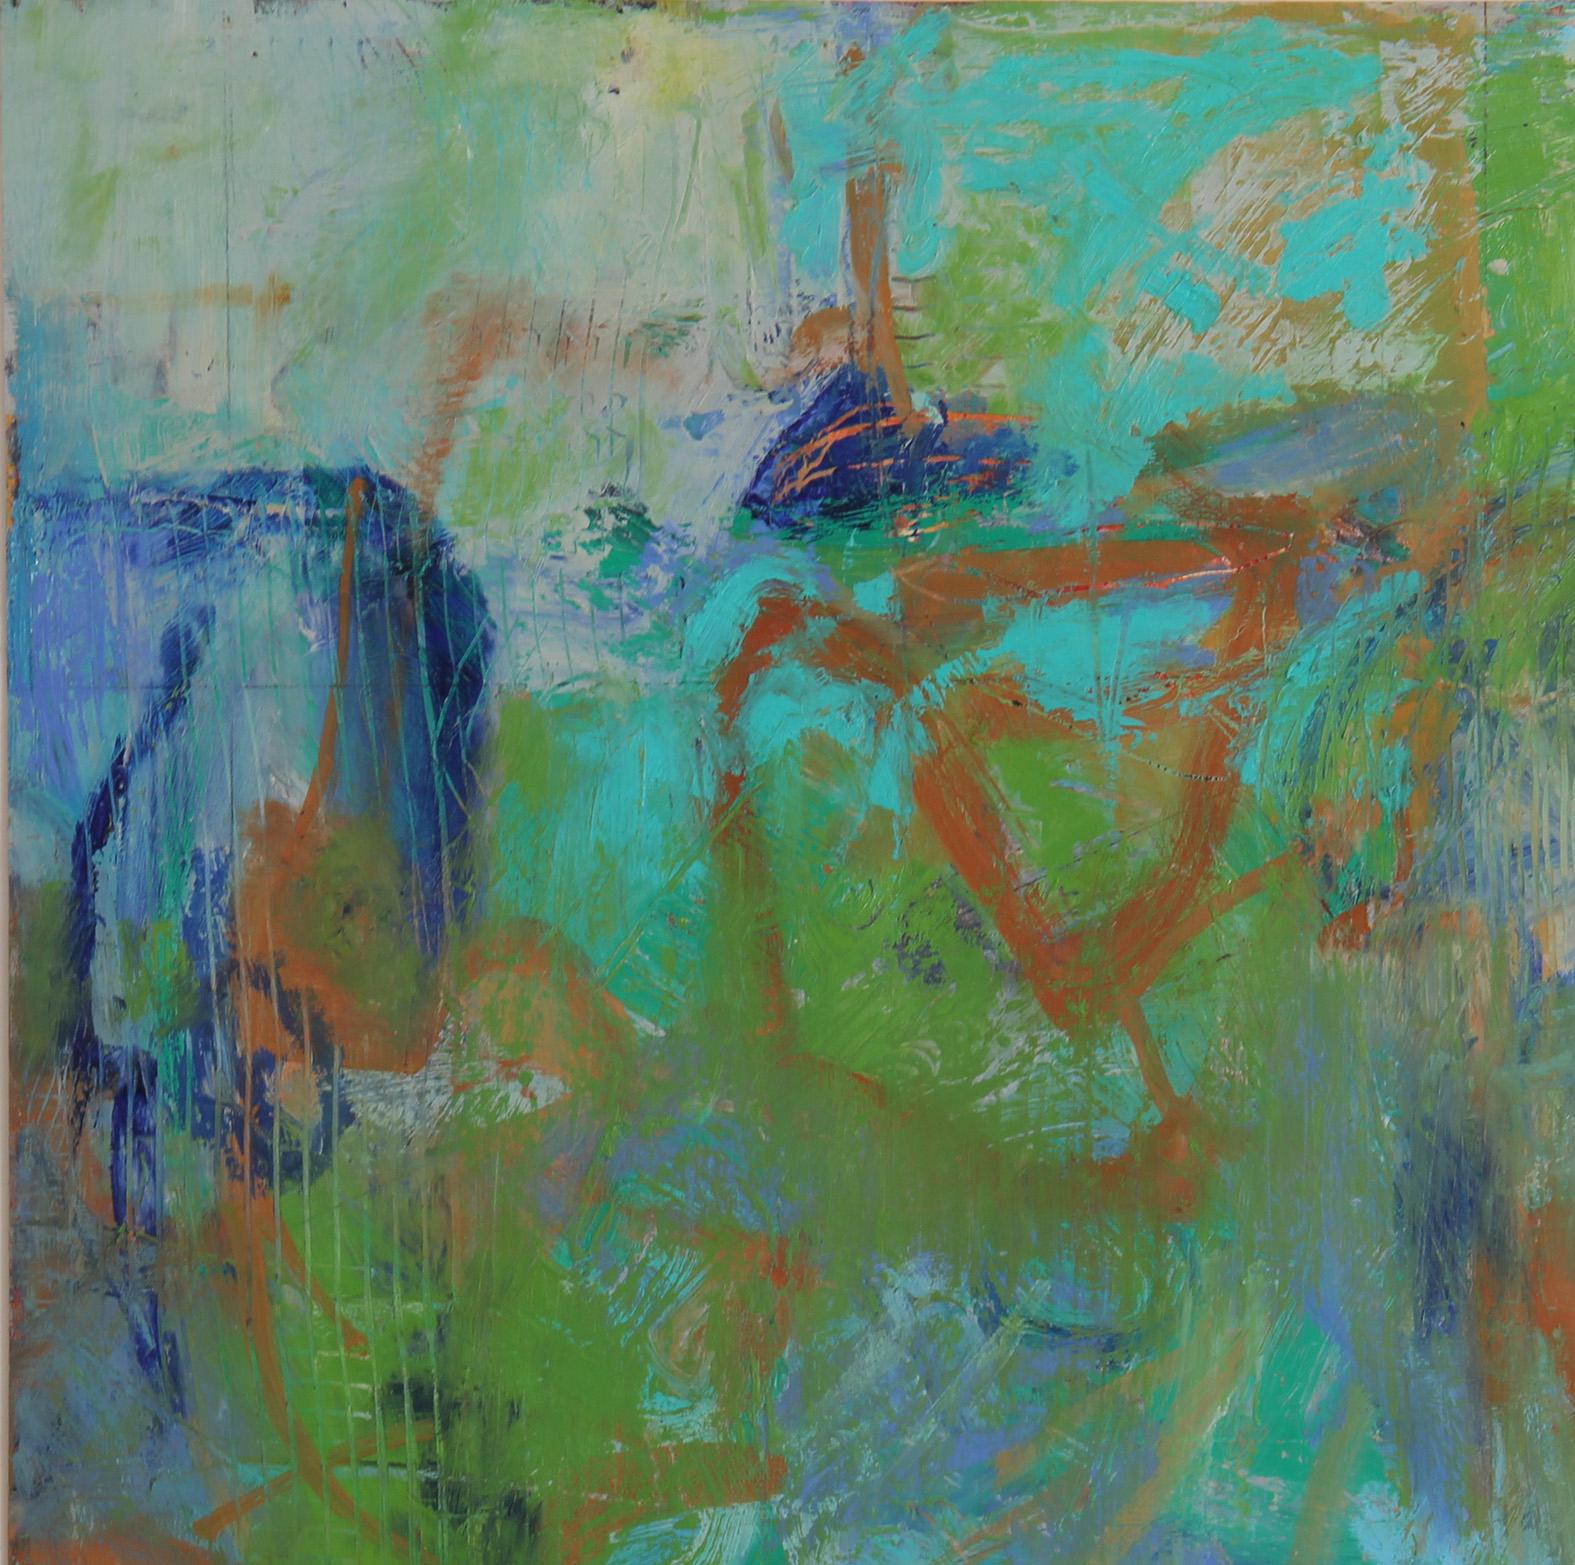 Finding My Way 2
Cheryl D. McClure
oil on paper on wood panel
20 x 20 x 0 in
Inv #: 795
Price $1800
To make my paintings I have come to the realization that I use what I call the ‘Three I’s” of INFLUENCES, INTUITION. and  INTENT.

Like a lot of